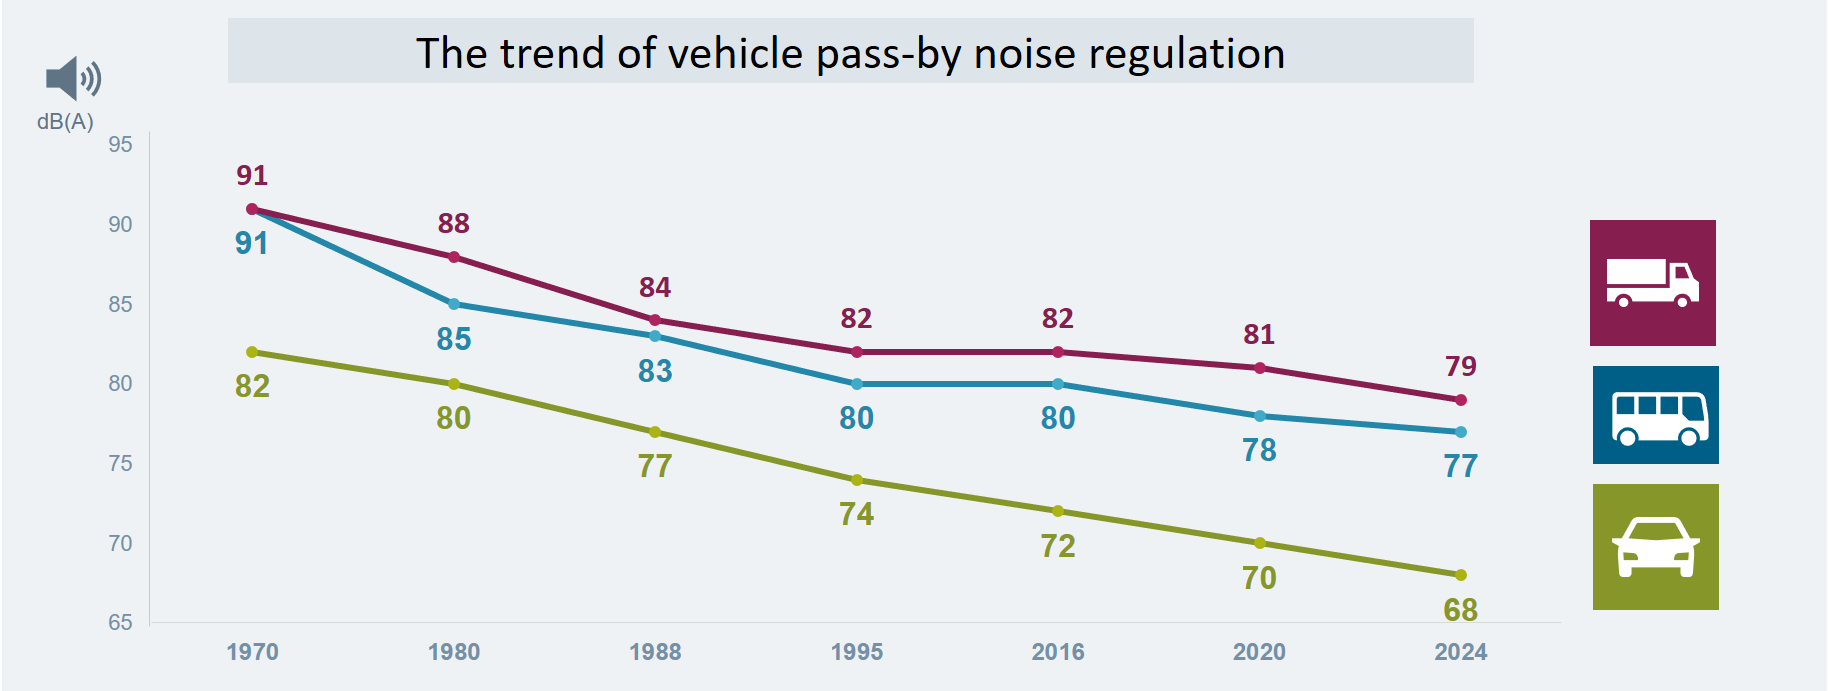 Trend of pass-by noise regulation